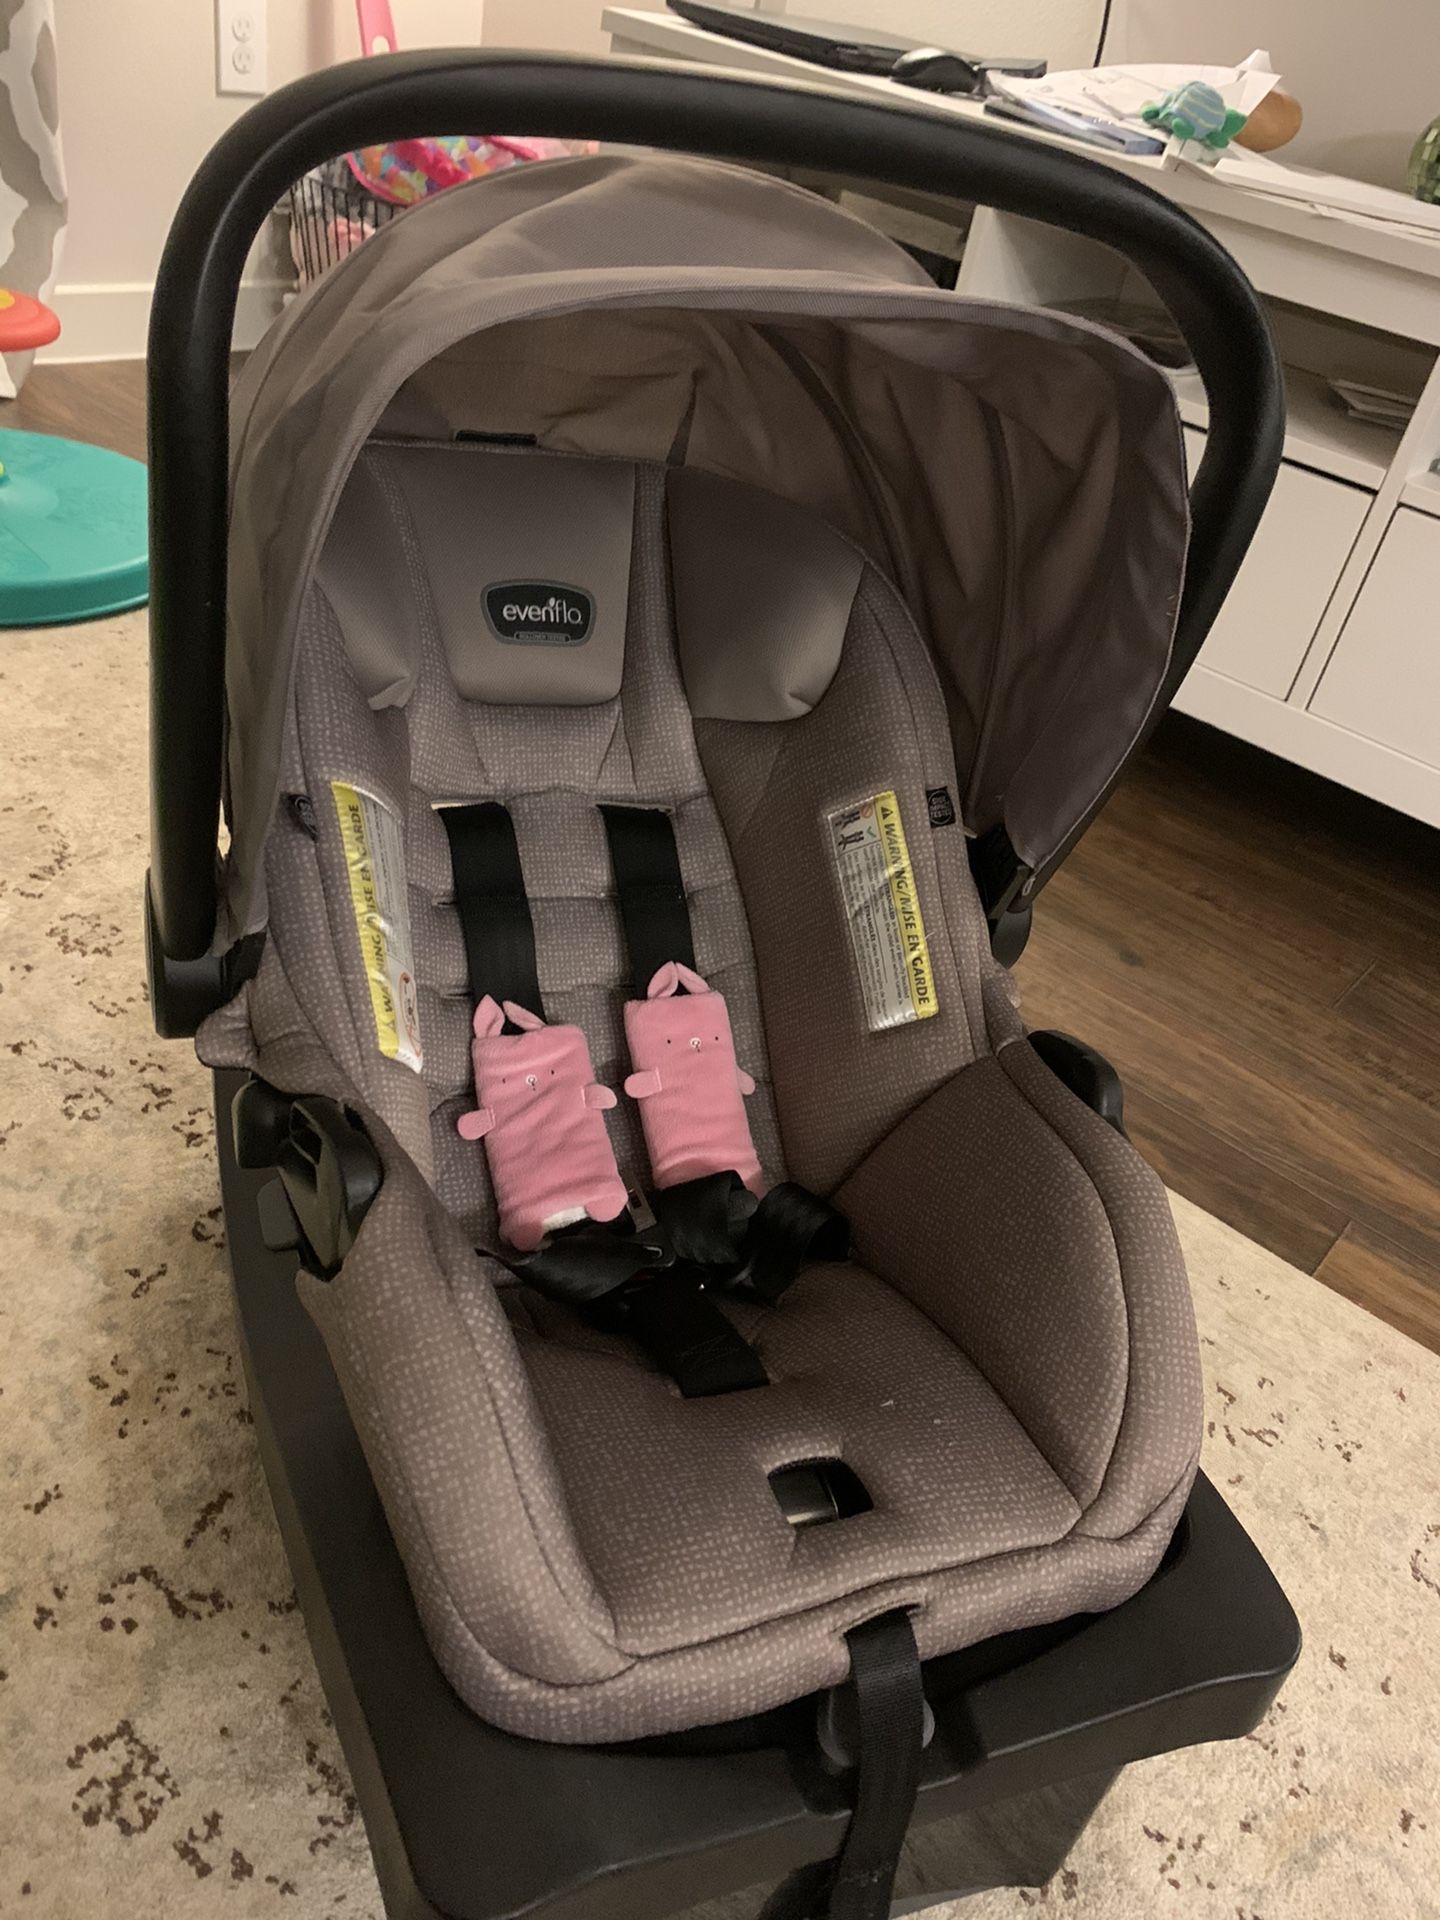 Evenflo Infant Car Seat with (2) seat bases